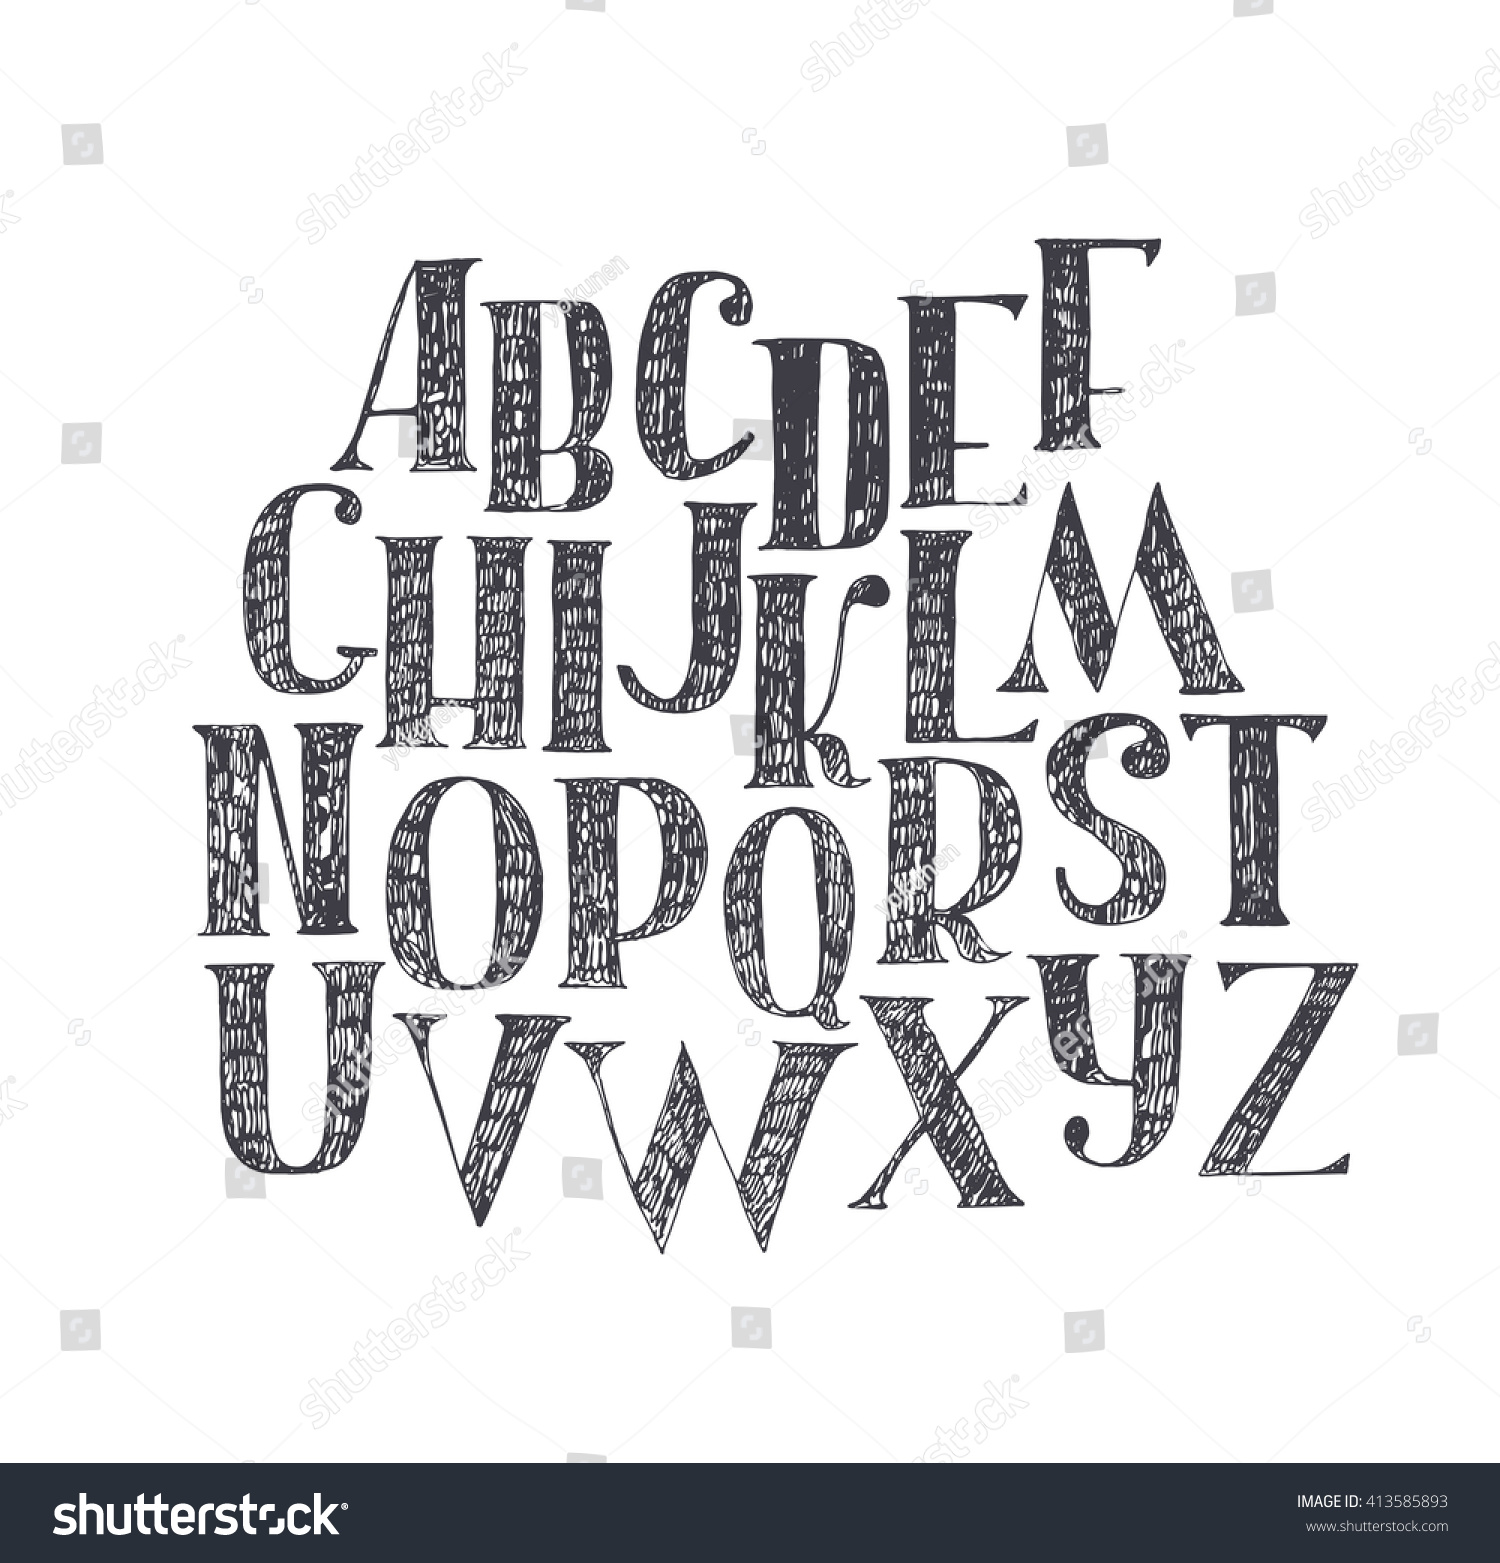 English hand drawn abc from a to z. Capital font made with nib and serif, decorated hatch alphabet, painted freehand. Isolated on background vector illustration. Letter made in classical hatched style #413585893